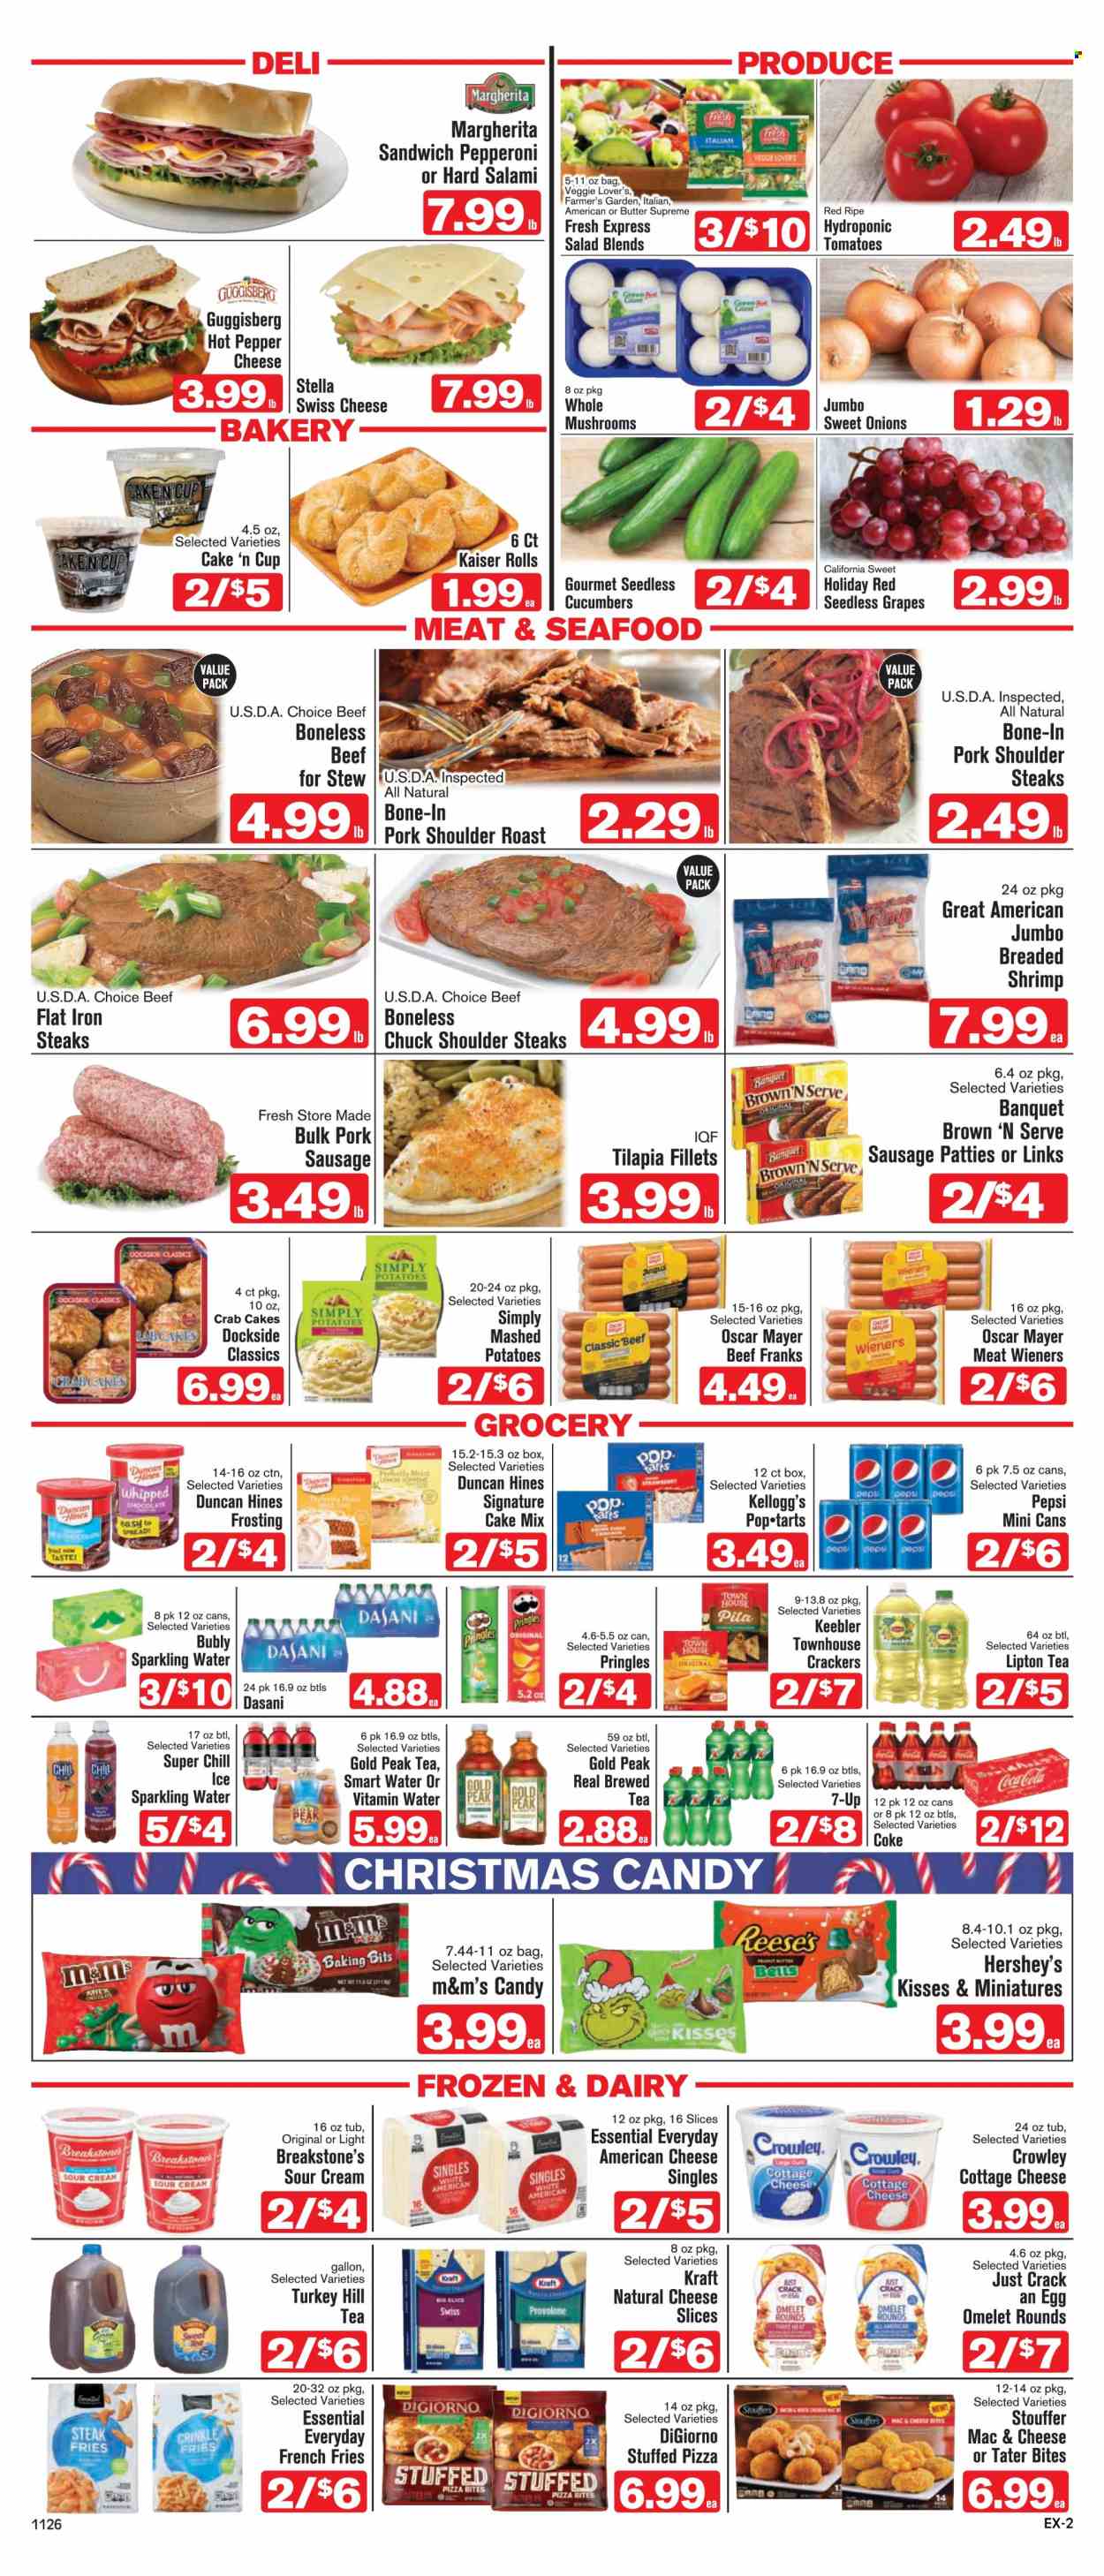 thumbnail - Shop ‘n Save Express Flyer - 11/26/2022 - 12/02/2022 - Sales products - pita, cake mix, salad, grapes, seedless grapes, steak, pork meat, pork roast, pork shoulder, tilapia, seafood, shrimps, crab cake, mashed potatoes, pizza, sandwich, Kraft®, salami, Oscar Mayer, sausage, pork sausage, pepperoni, Brown 'N Serve, american cheese, cottage cheese, sliced cheese, swiss cheese, Provolone, butter, sour cream, Reese's, Hershey's, potato fries, french fries, crinkle fries, chocolate, M&M's, crackers, Kellogg's, Pop-Tarts, Keebler, Pringles, frosting, rice, Coca-Cola, Pepsi, Lipton, 7UP, Gold Peak Tea, sparkling water, Smartwater, vitamin water, tea. Page 2.